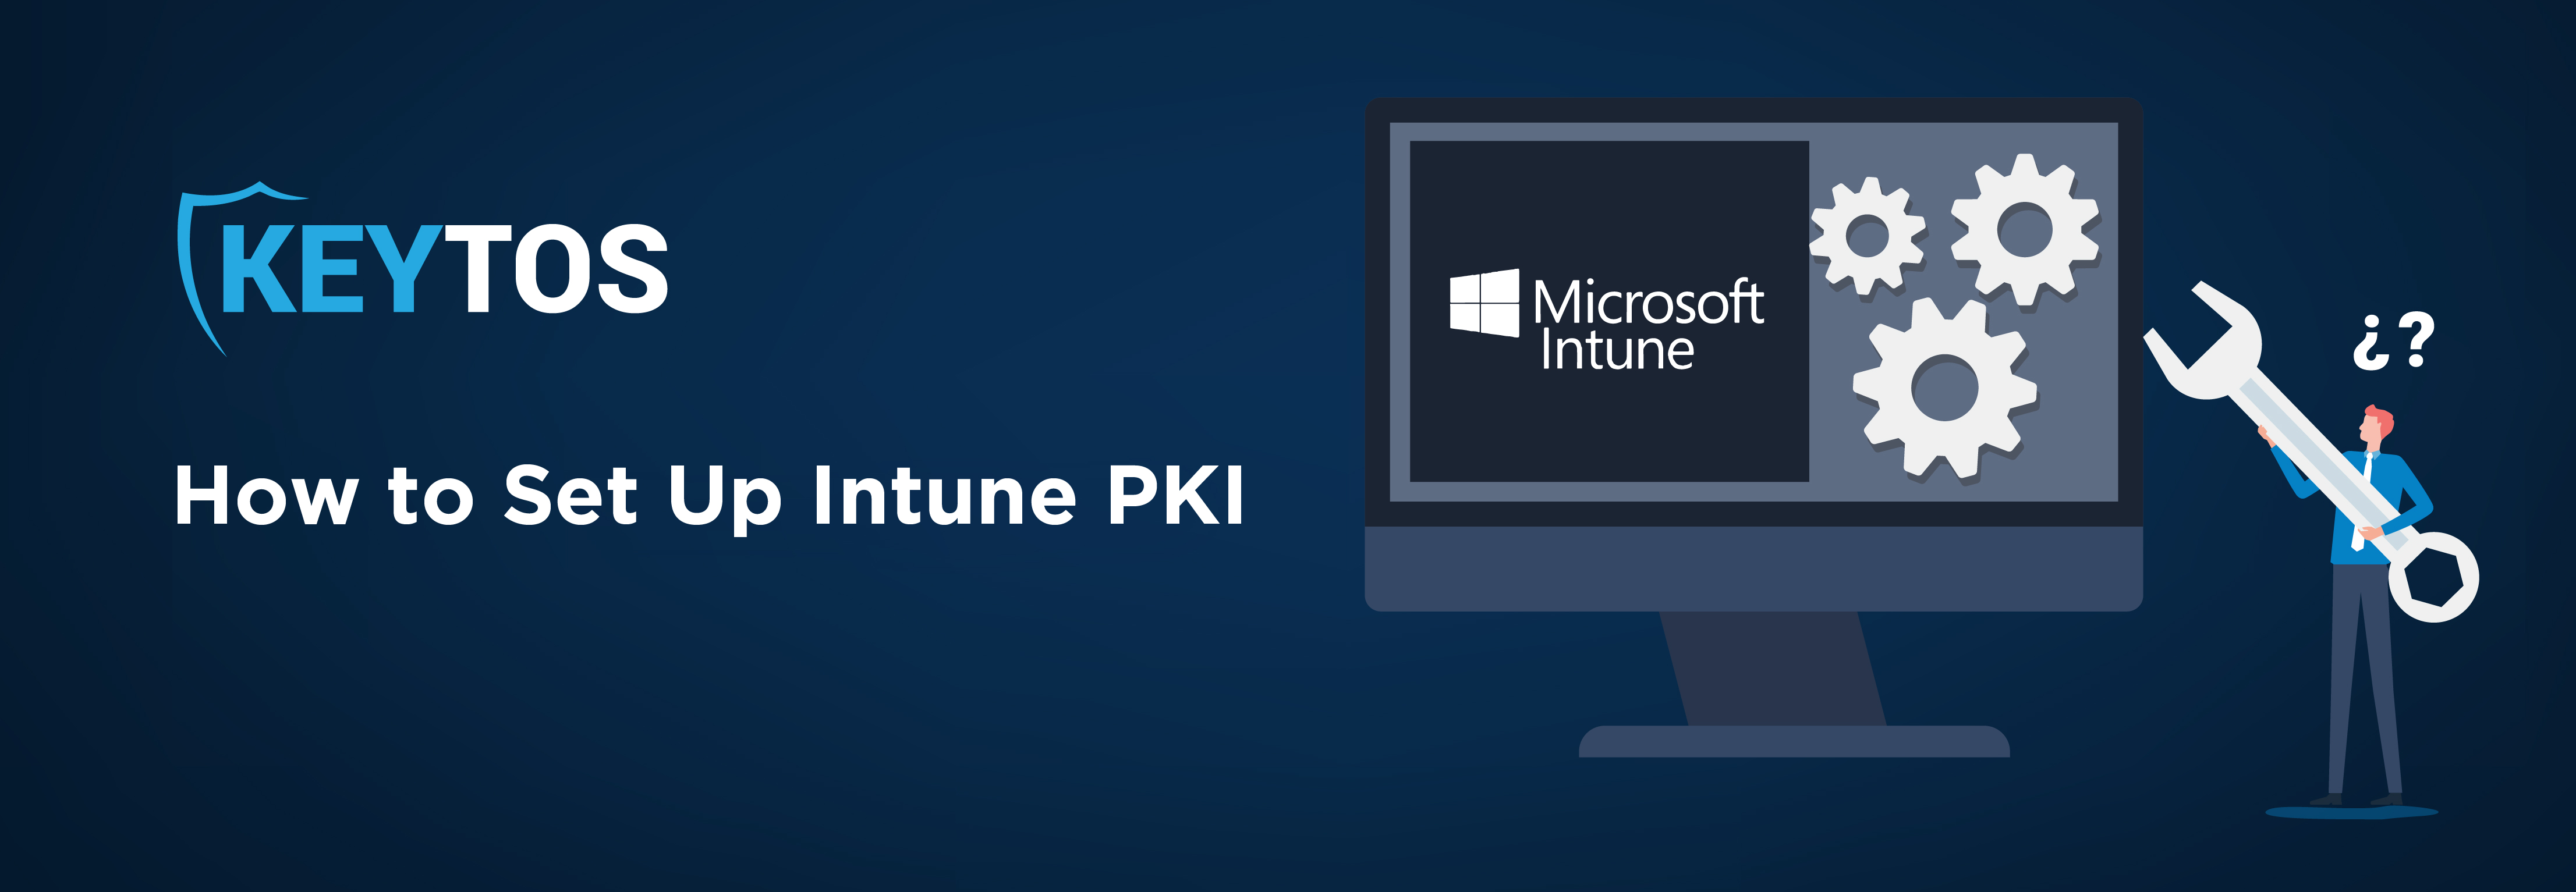 How to set up Intune PKI